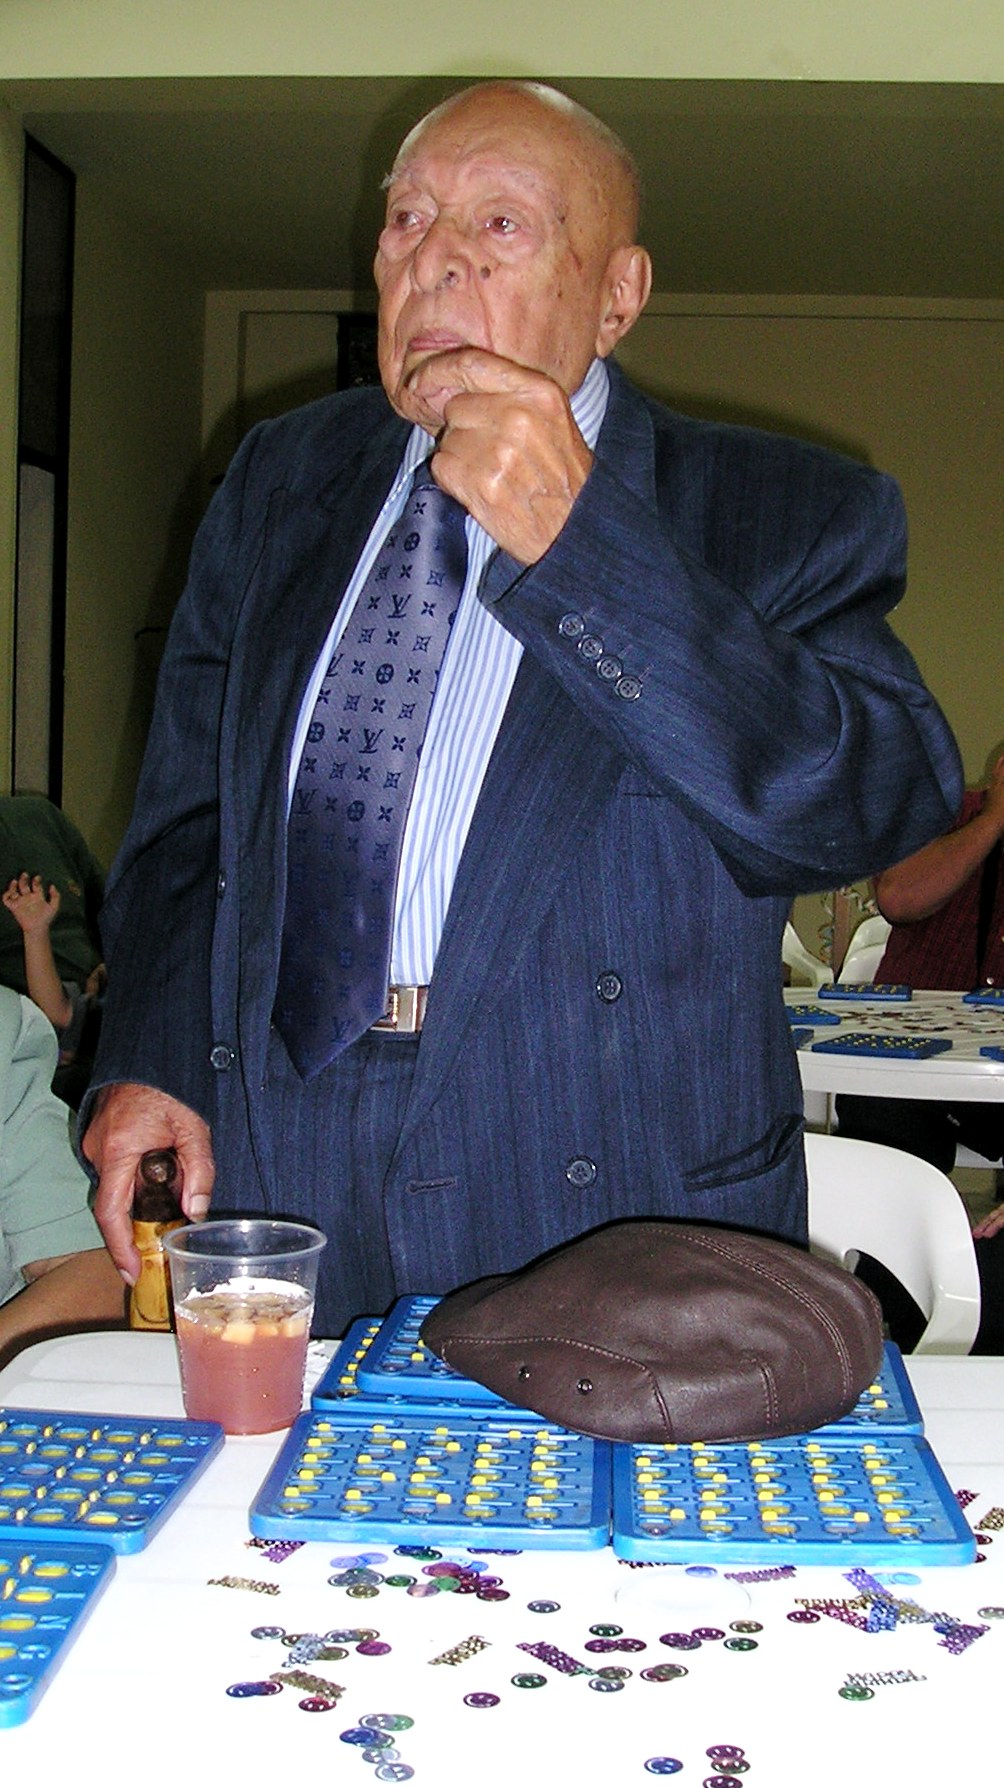 an old man with his fingers on his mouth is standing in front of several paper table decorations